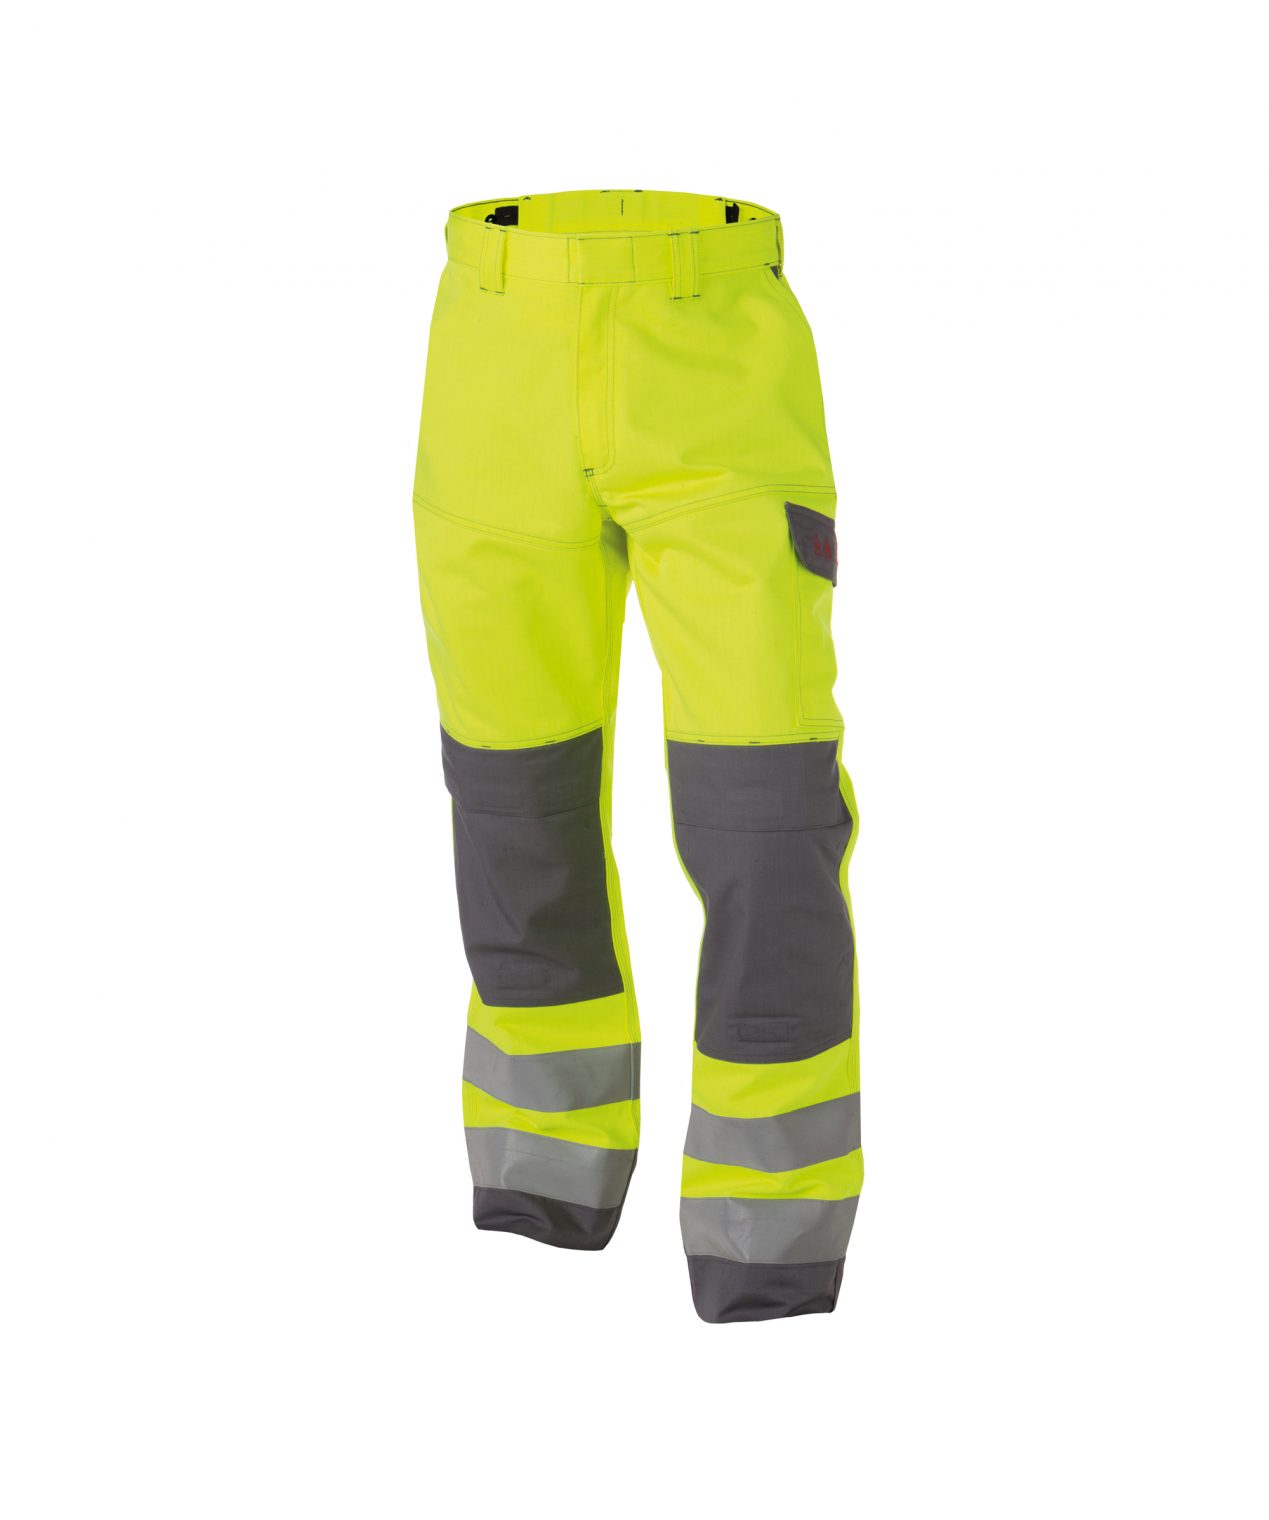 manchester multinorm high visibility work trousers with knee pockets fluo yellow graphite grey front 1